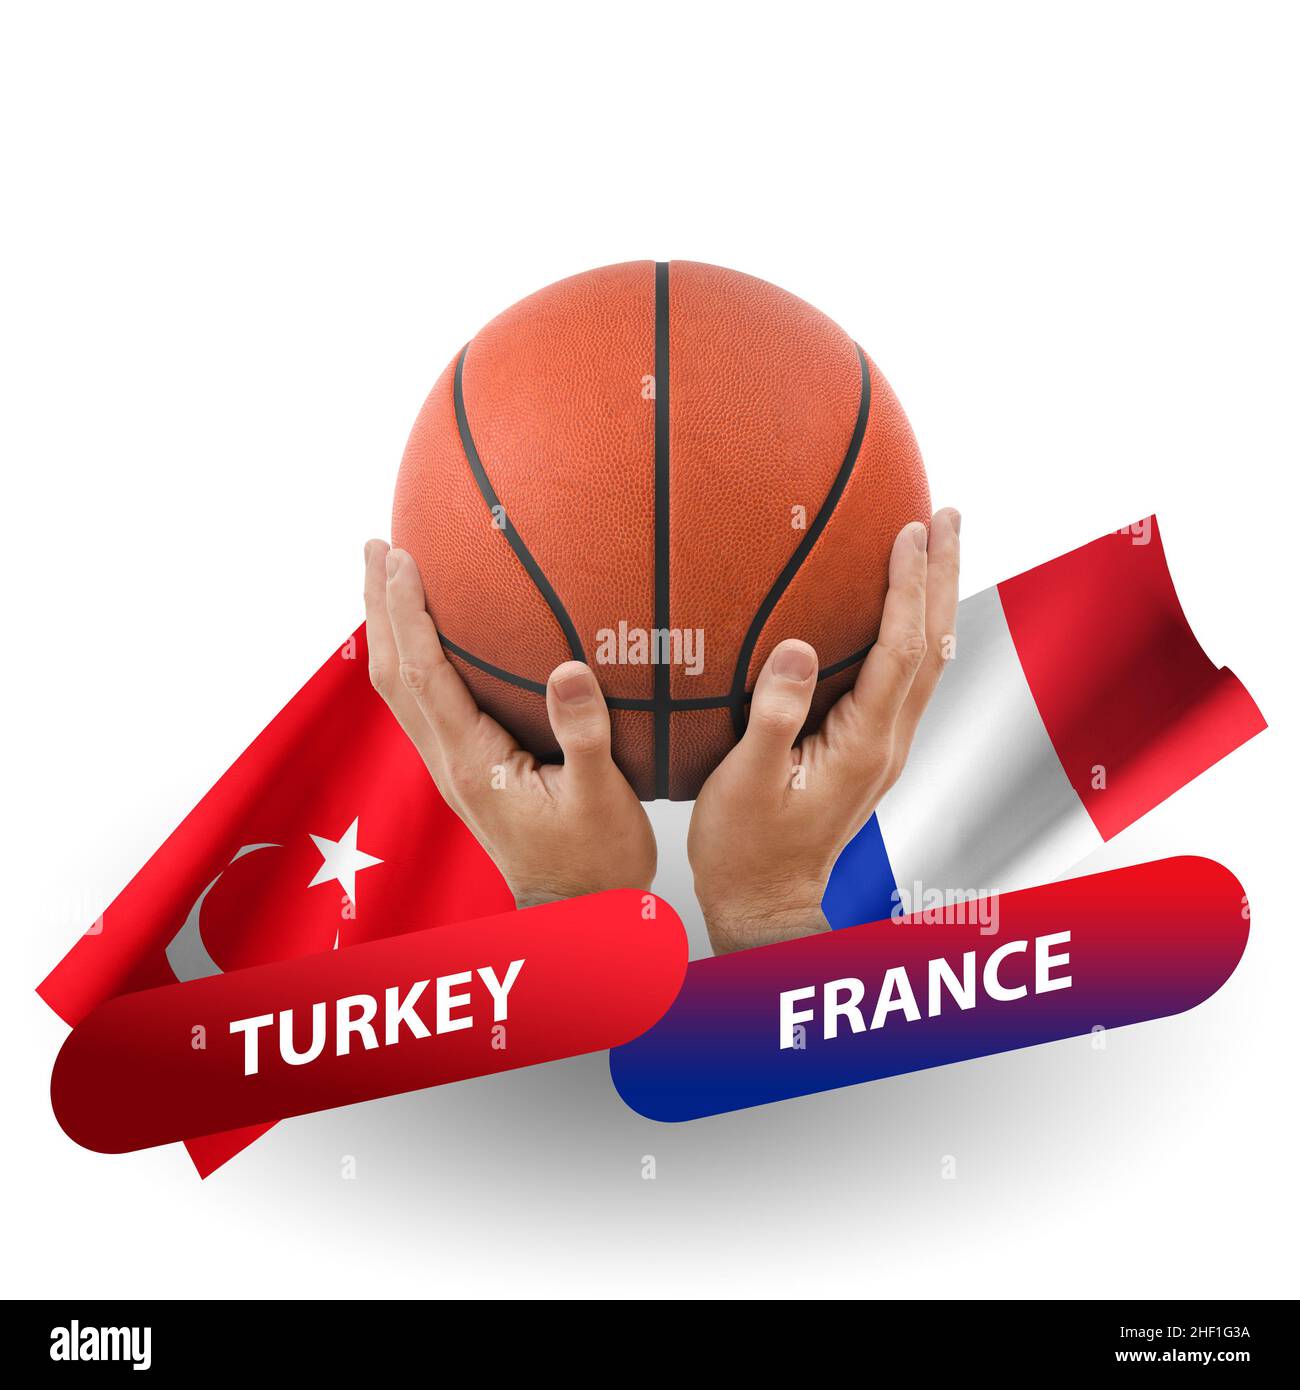 France vs turkey Cut Out Stock Images & Pictures - Alamy